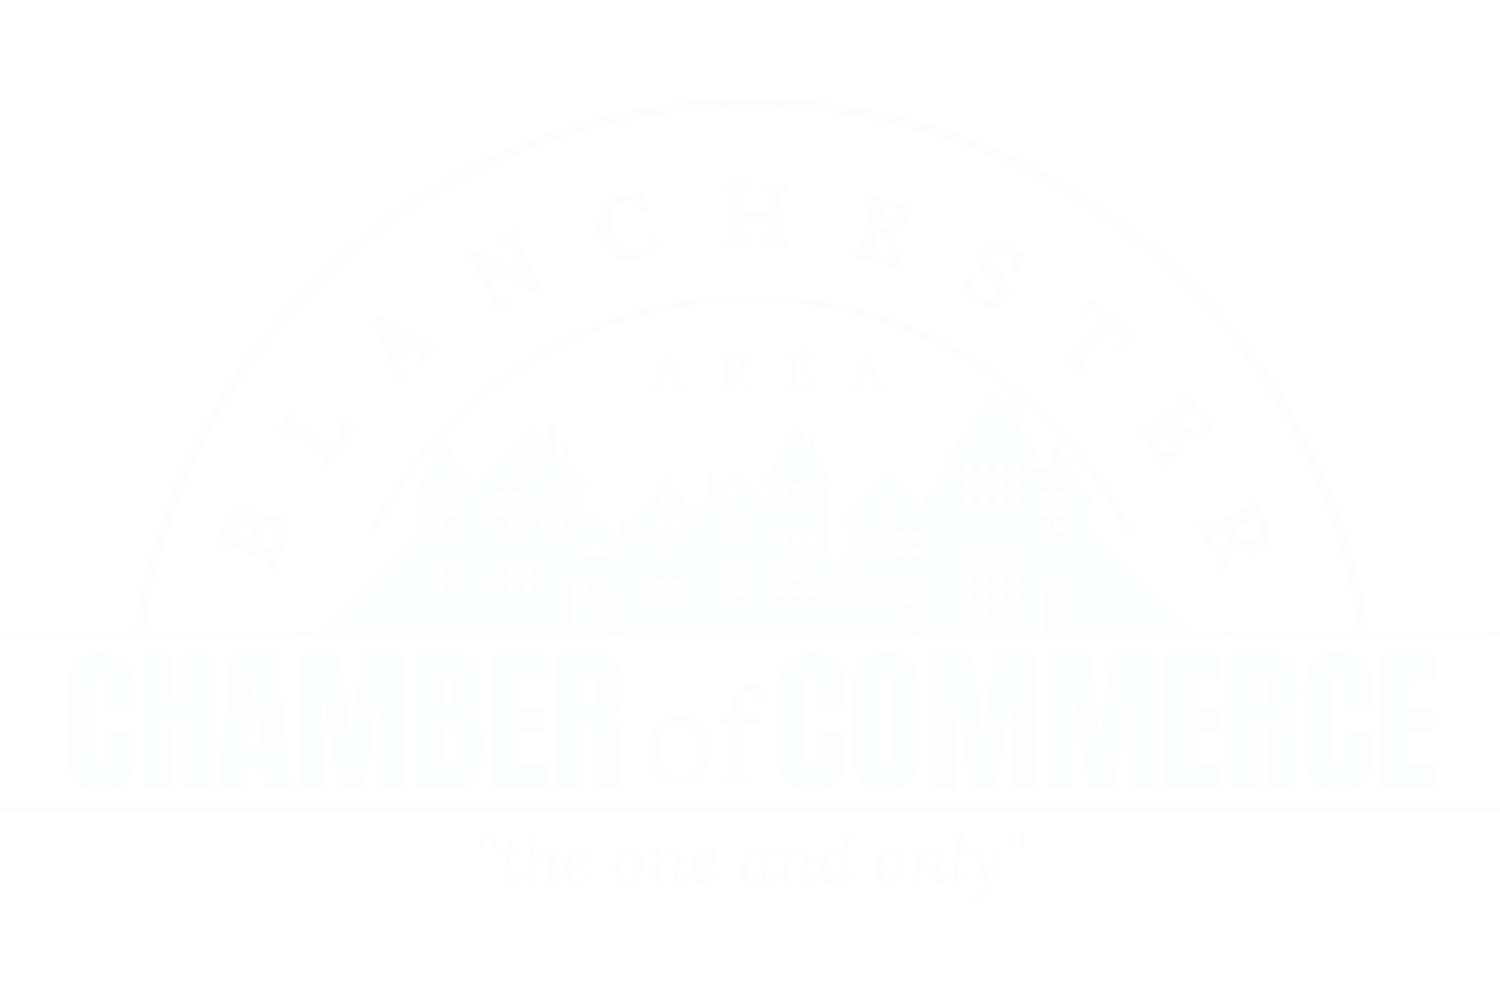 BLANCHESTER CHAMBER OF COMMERCE